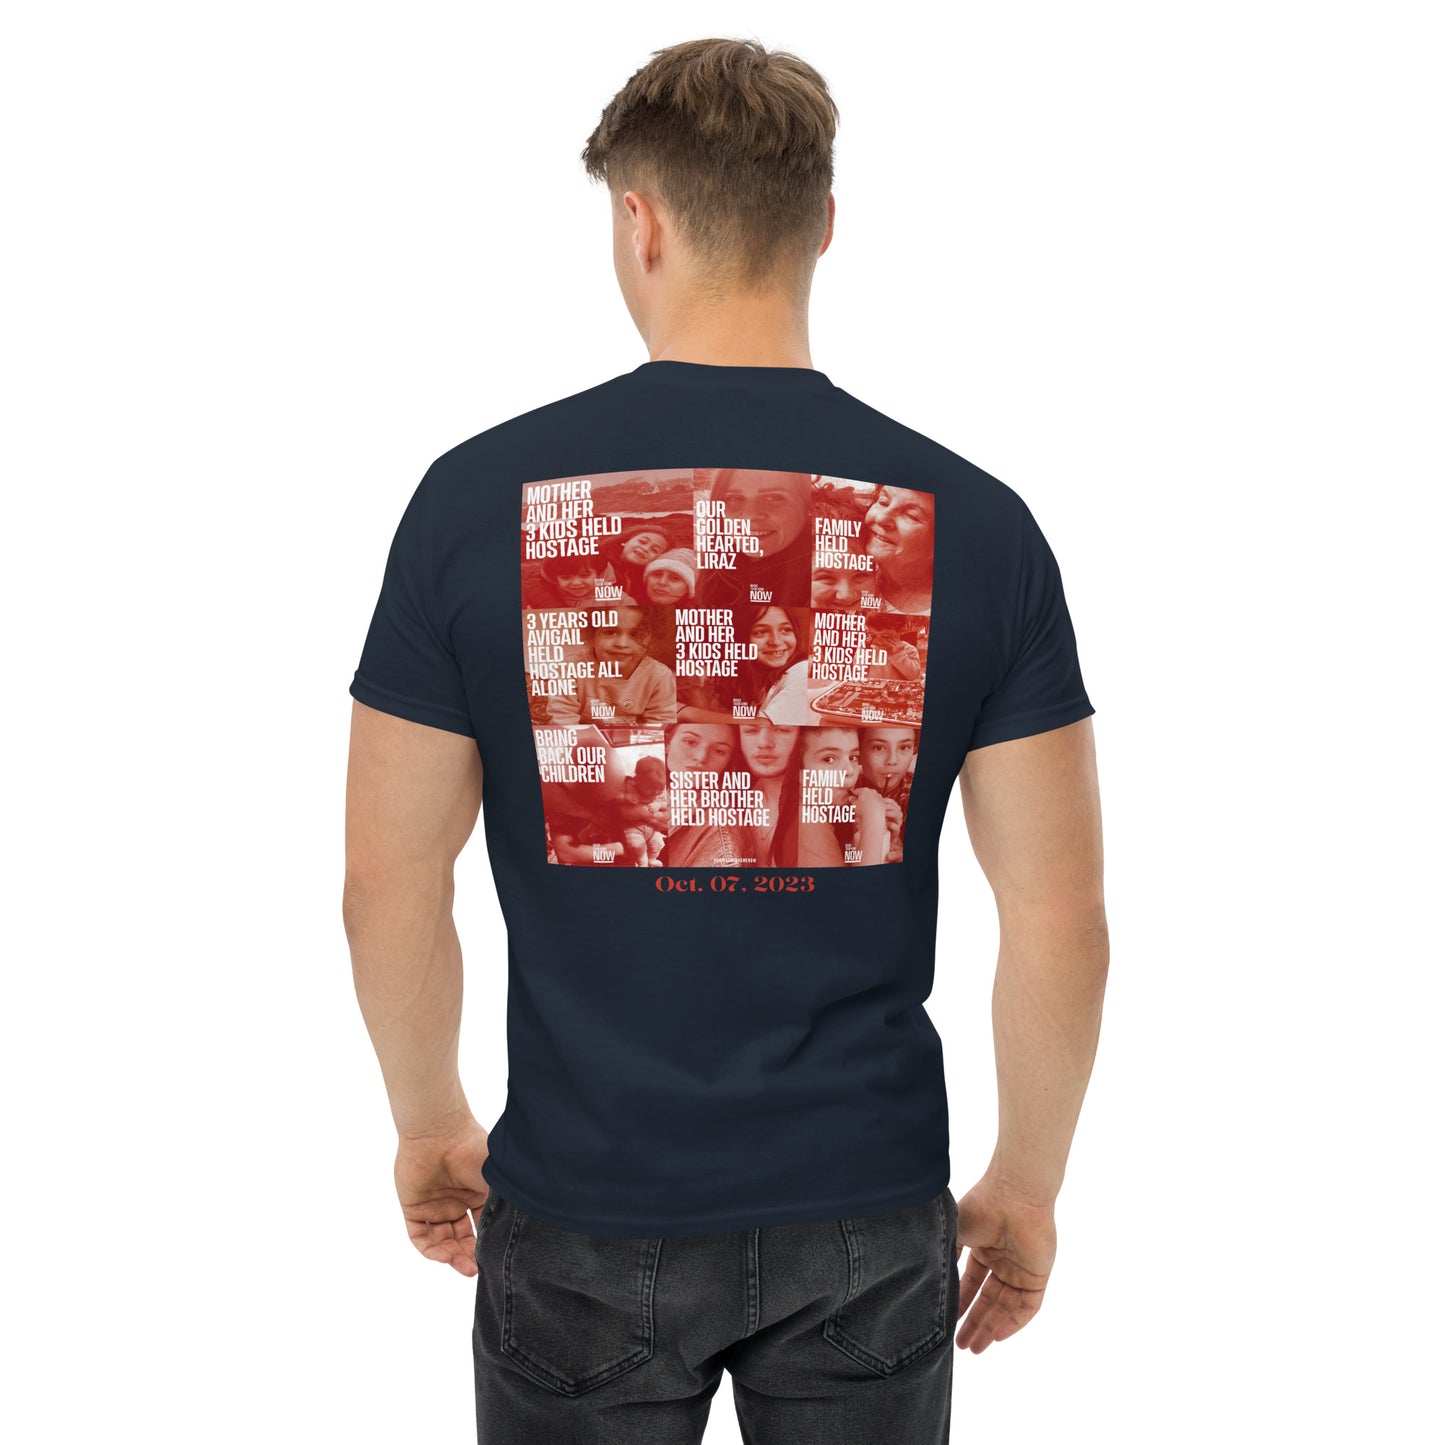 #BringThemHome #2 - Men's classic tee (4 colors)